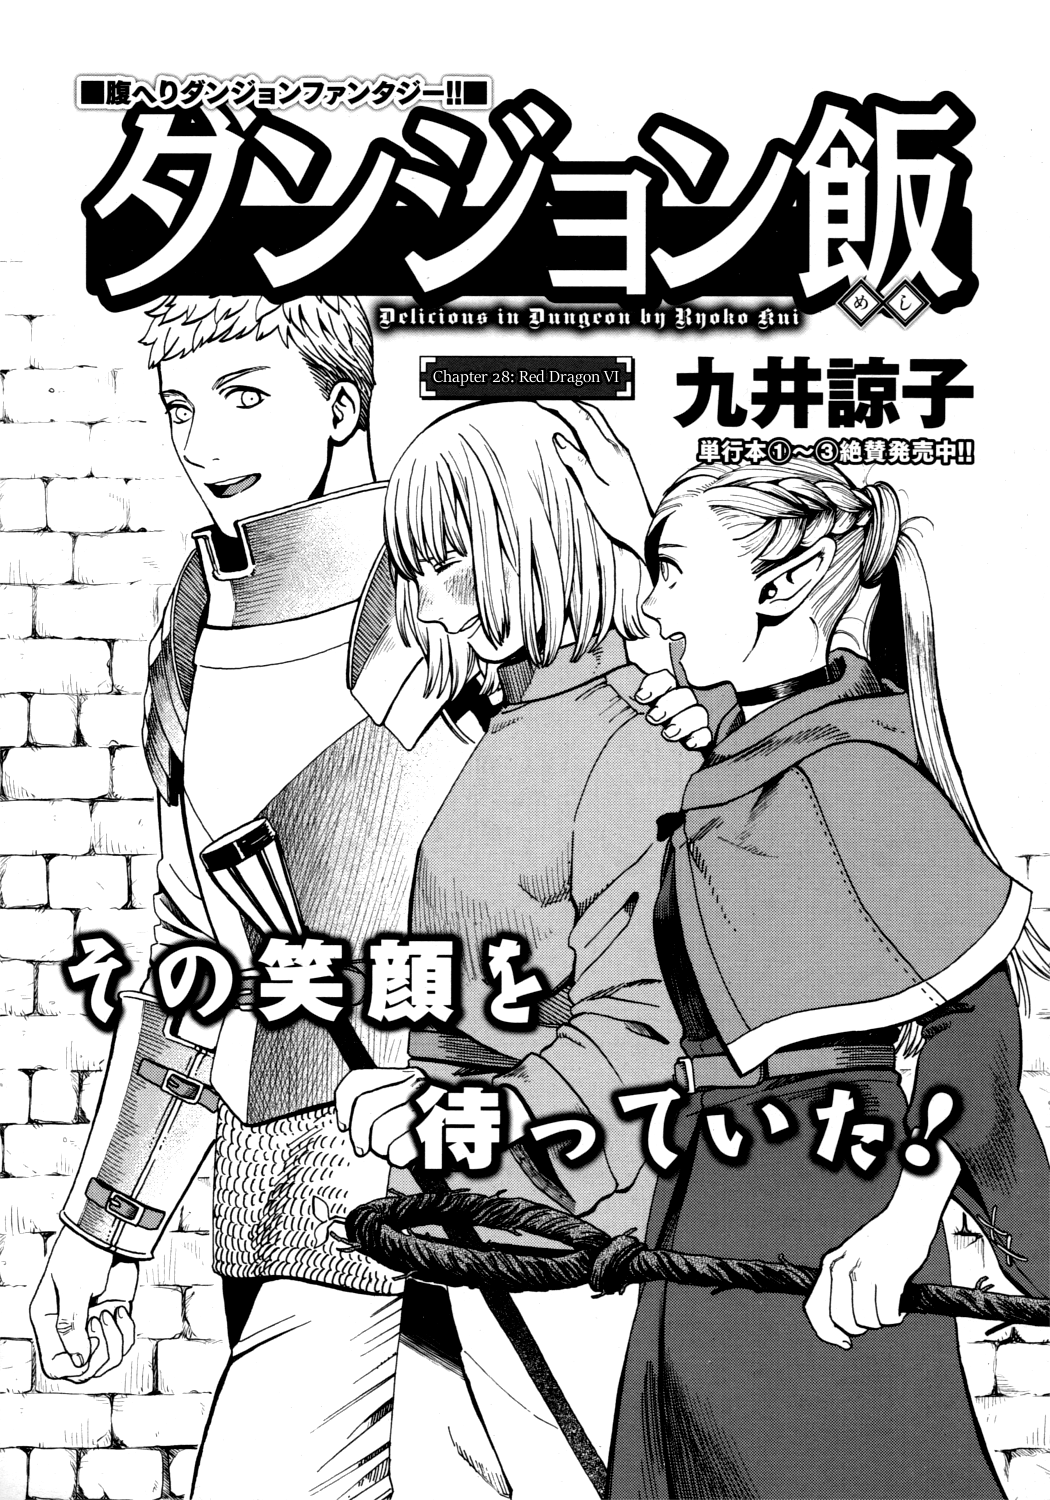 Dungeon Meshi Vol.4-Chapter.28-Red-Dragon-VI Image